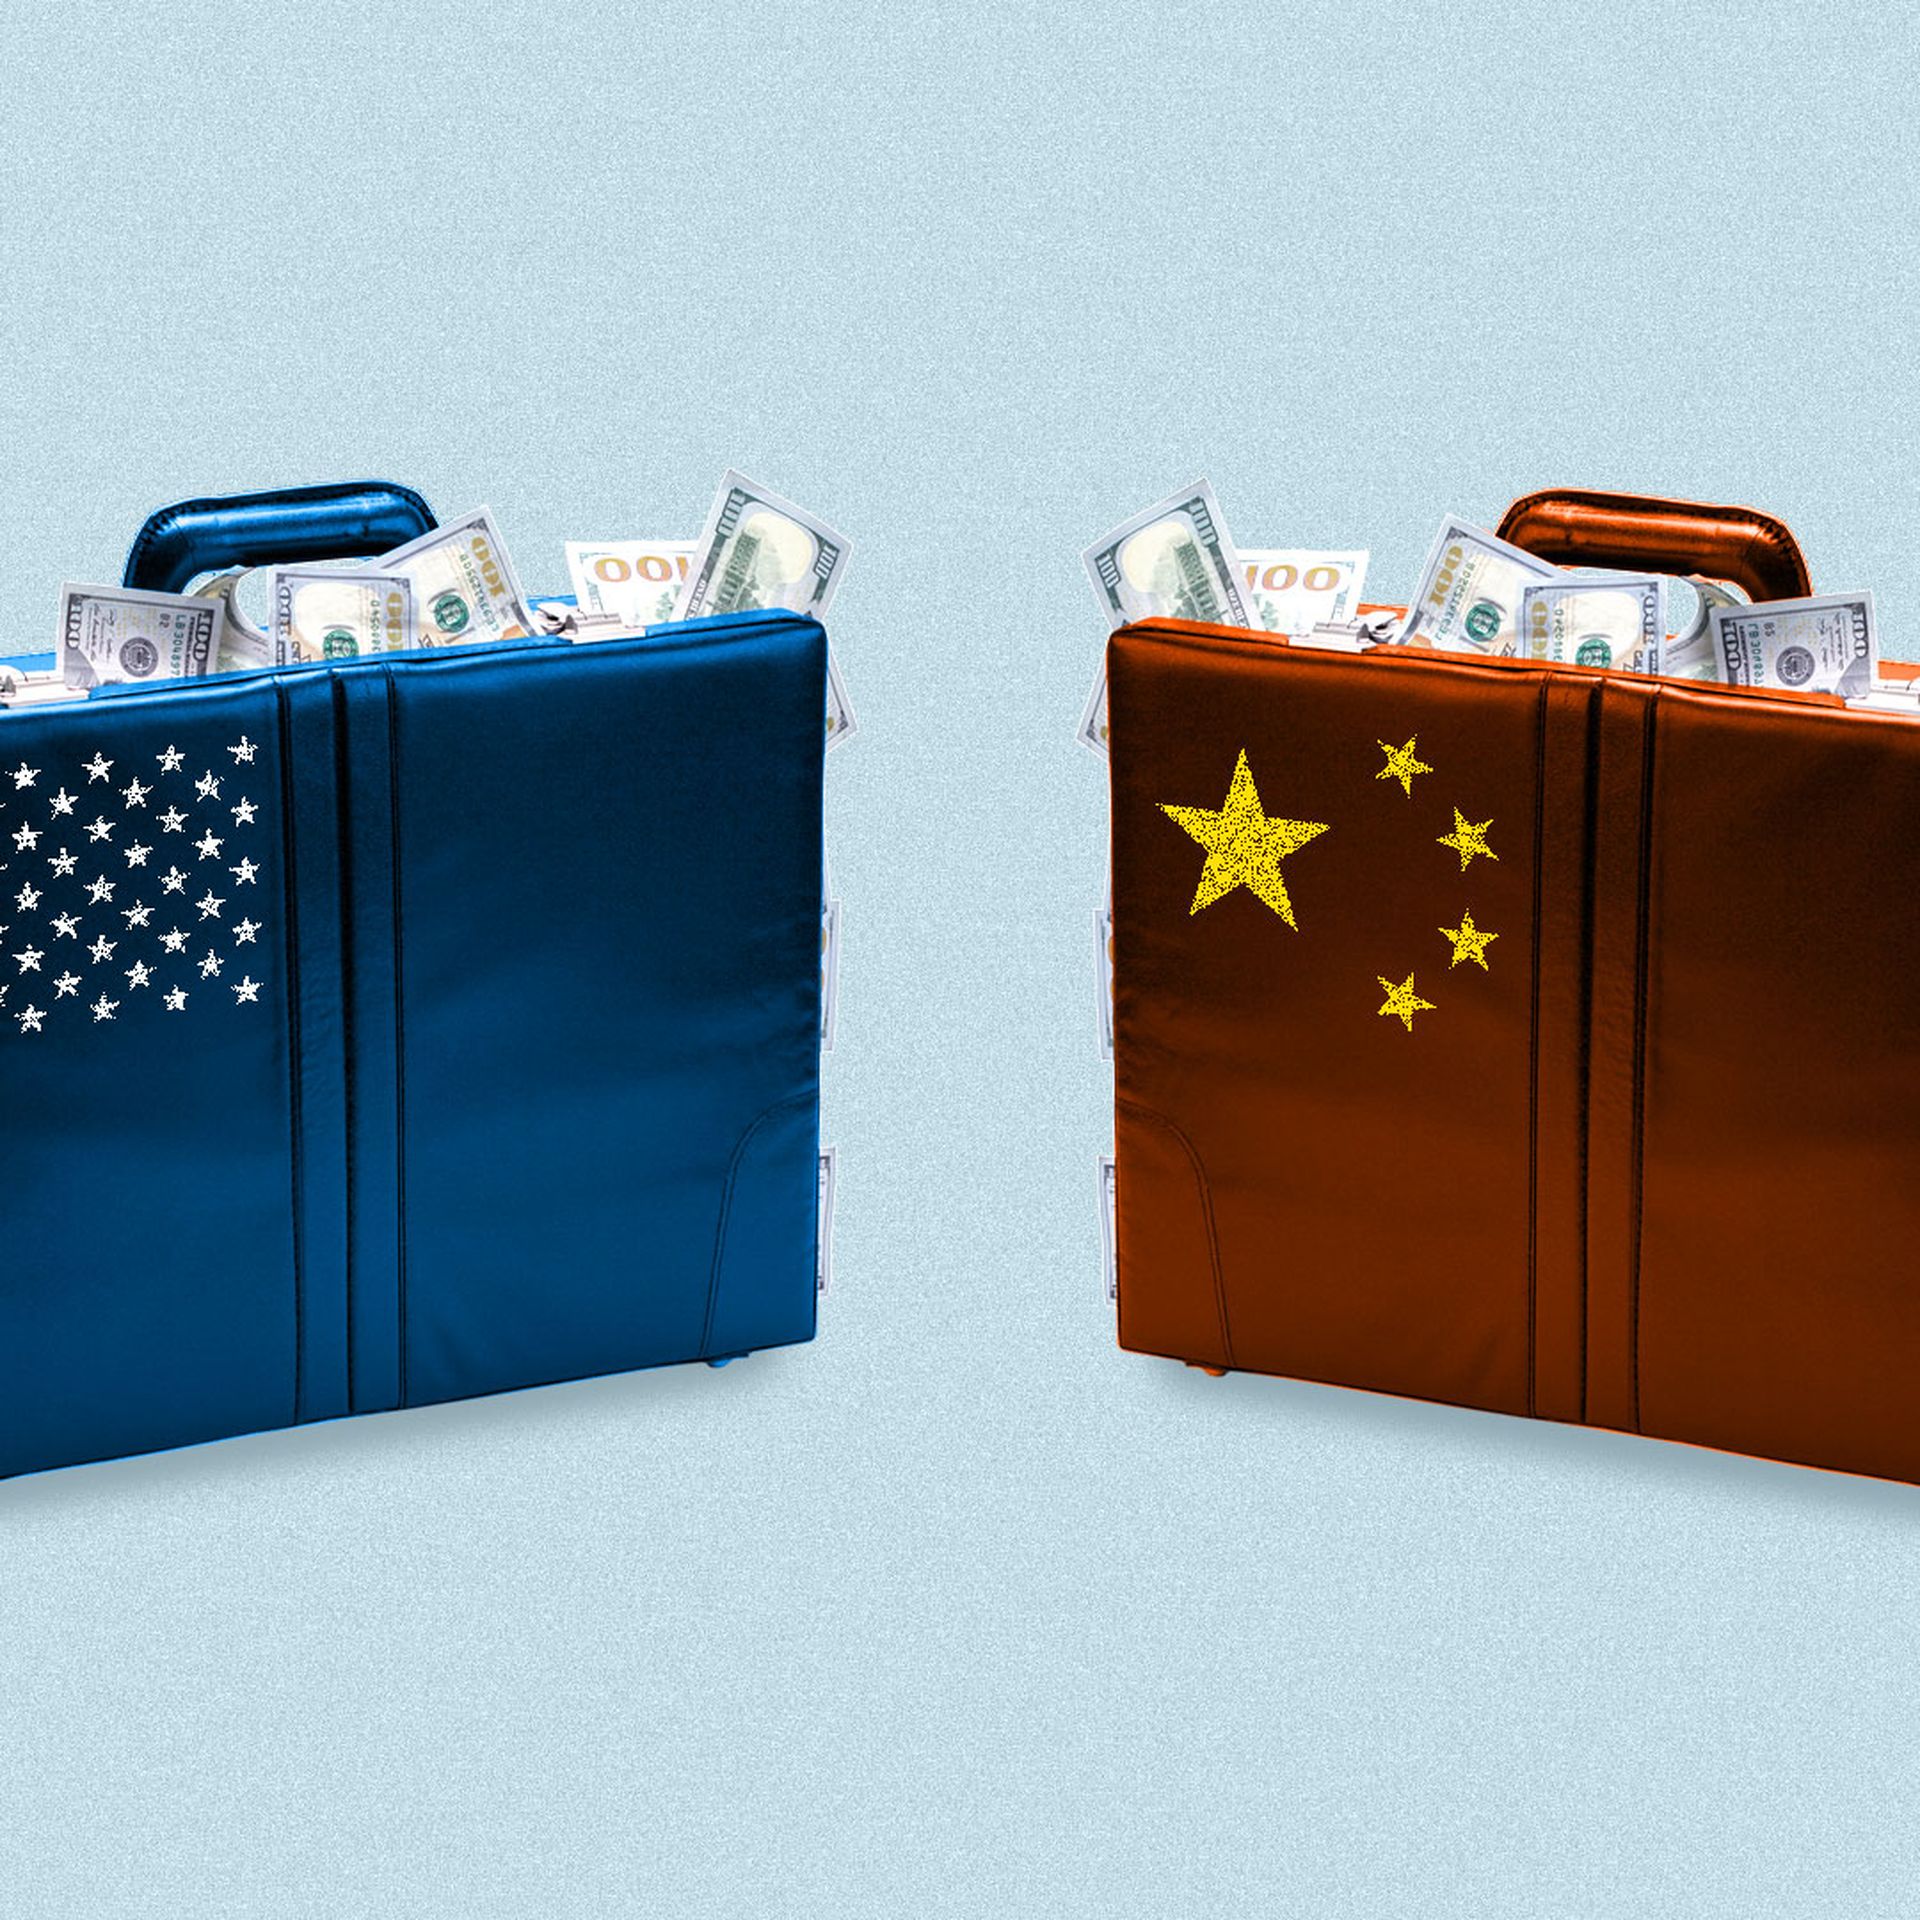 Two suitcases stuffed with cash, with the U.S. and Chinese flags on them